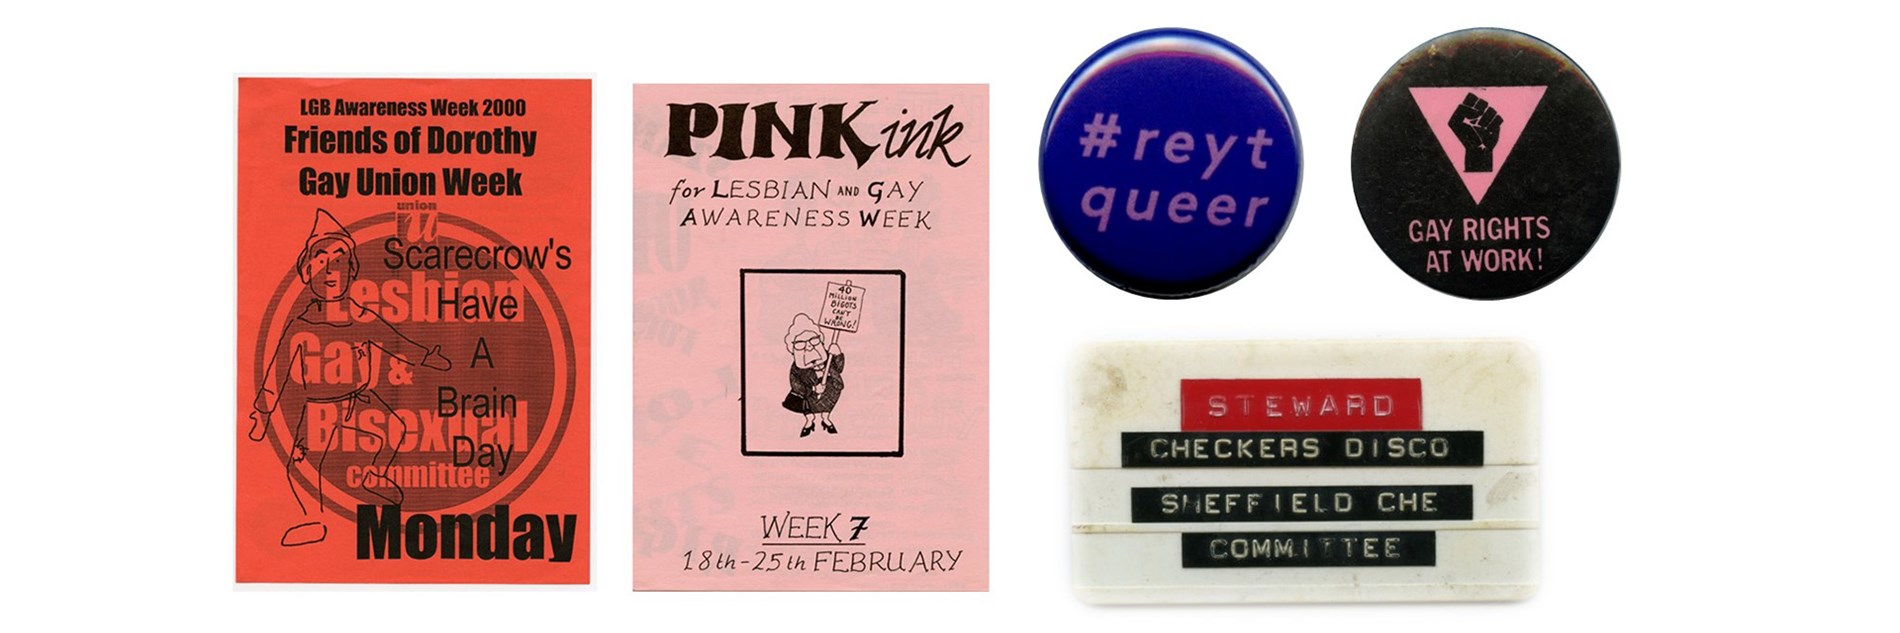 A collage of LGBTQ+ archival material. Two flyers: one for the Friends of Dorothy Gay Union Week and one for Lesbian and Gay Awareness Week. Three badges. One saying Reyt Queer, one saying Gay Rights at Work and a stewards staff badge for the Checkers Disco.